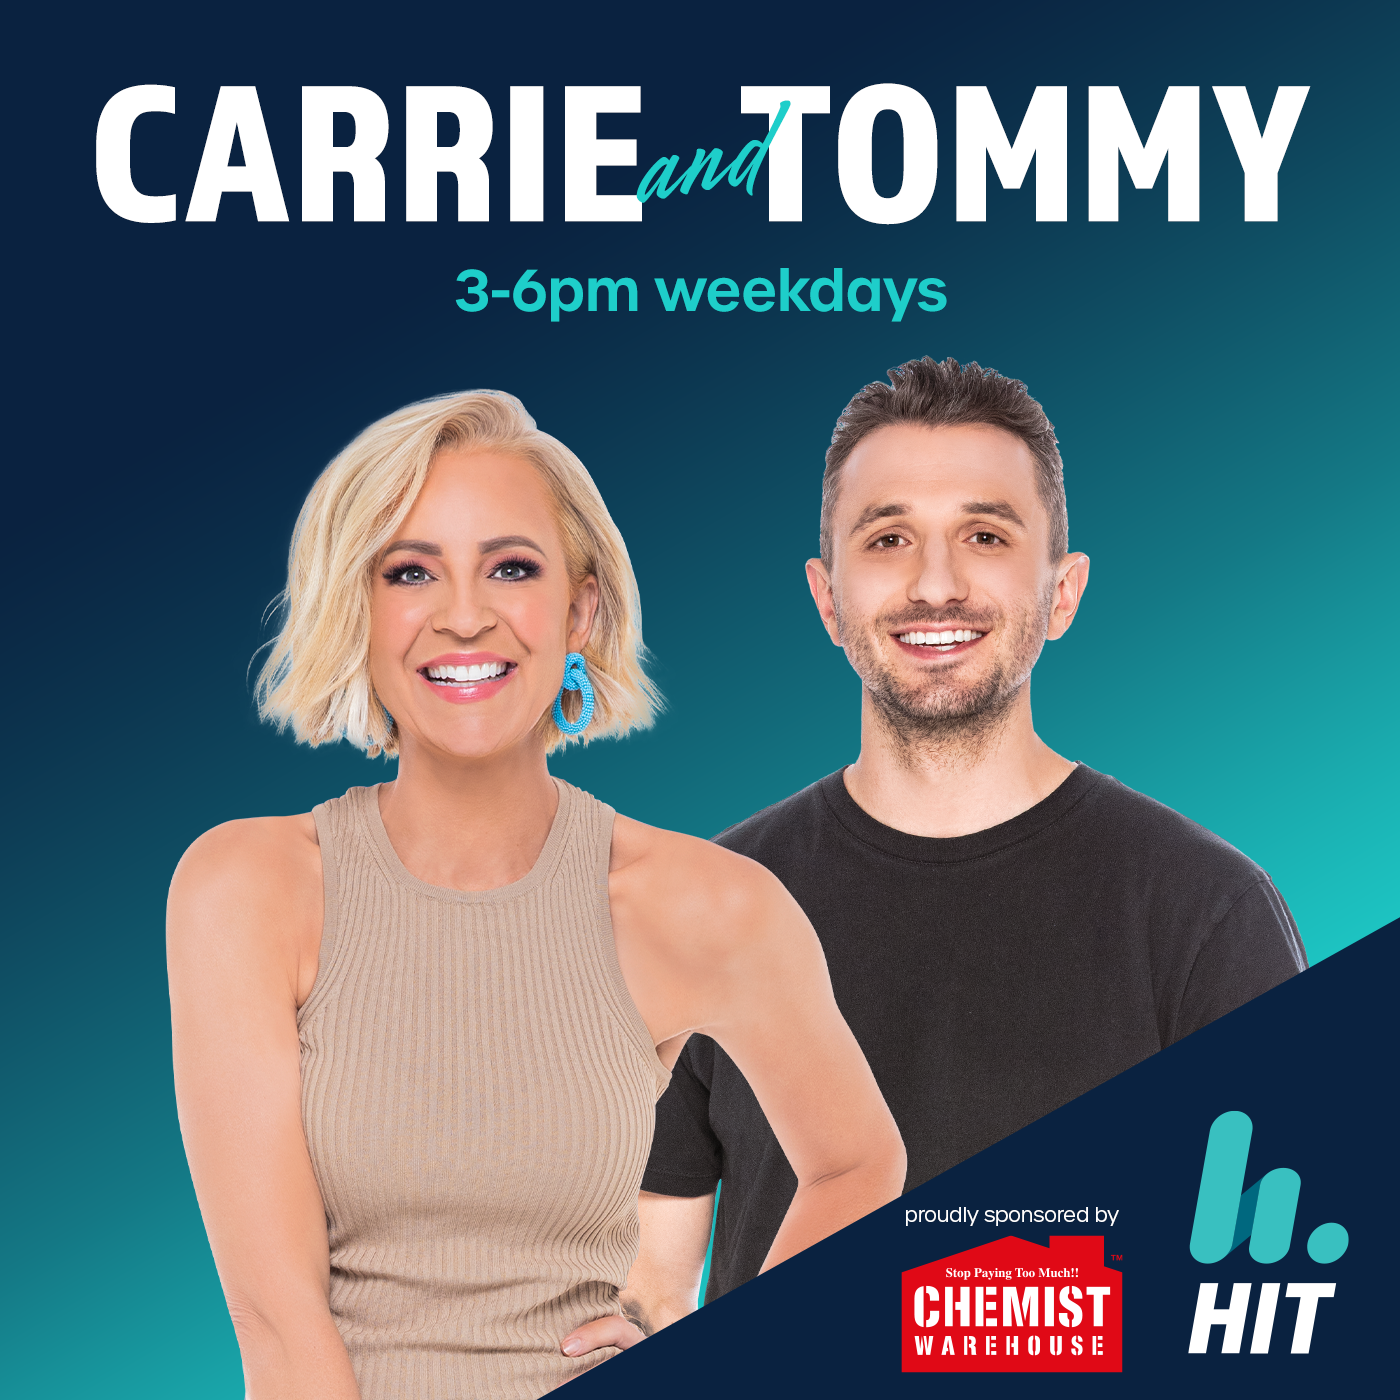 Carrie is FLAT as a TACK so we CHEER HER UP,  the TIME GAME is worth $2900, and Hughsey FORGETS who TOMMY LITTLE is!